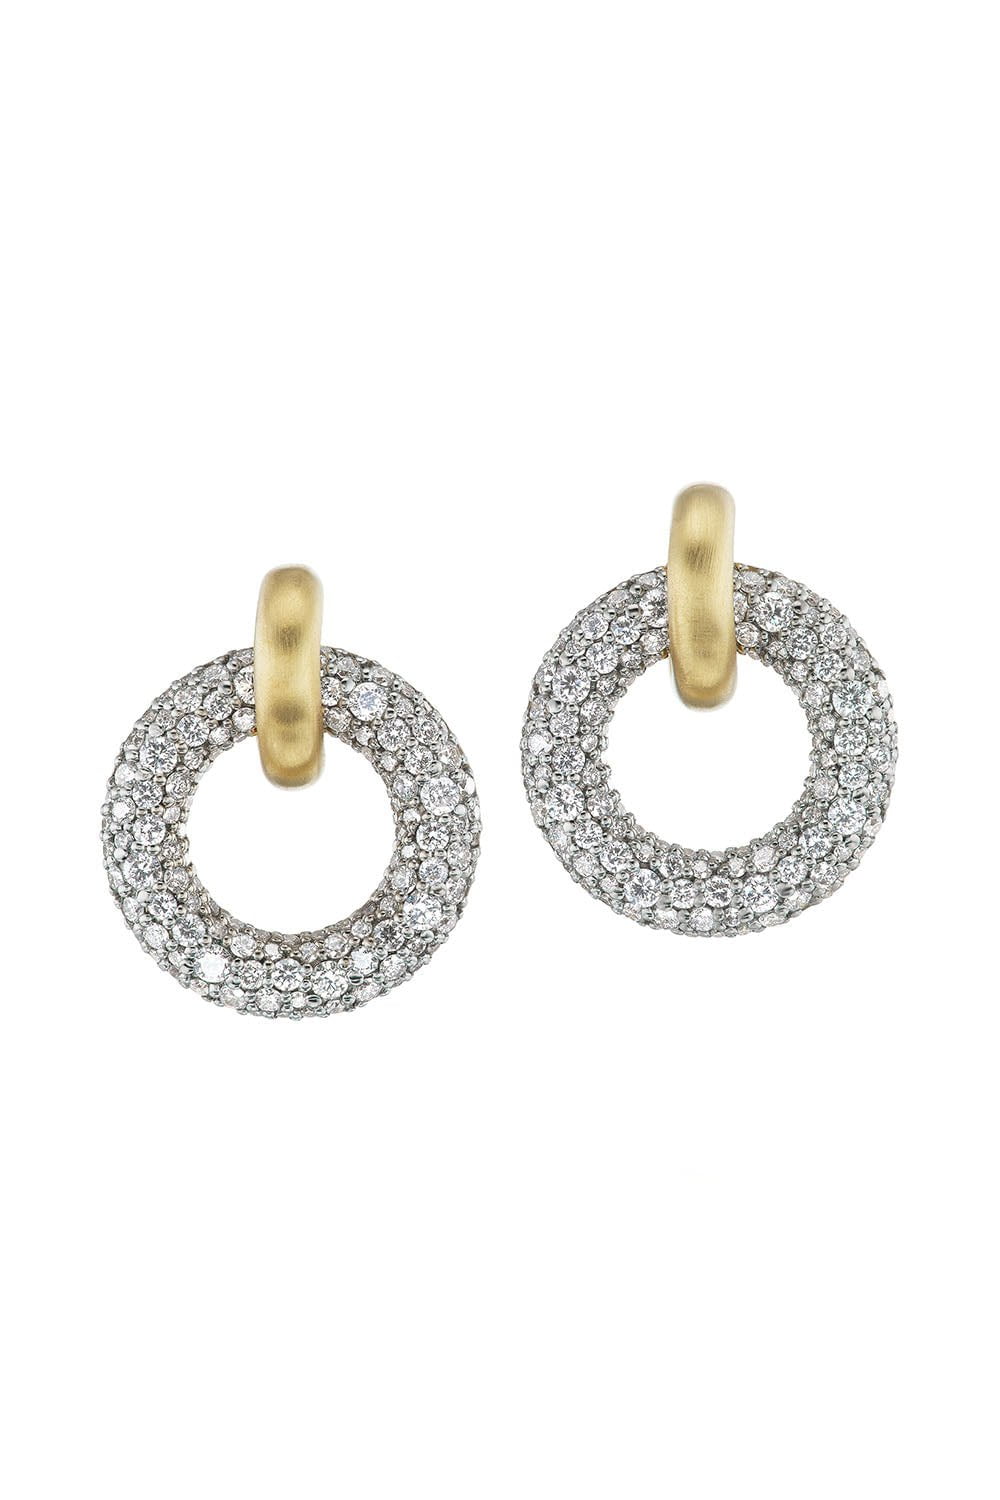 BECK JEWELS-Arco Spinning Reversible Earrings-YELLOW GOLD